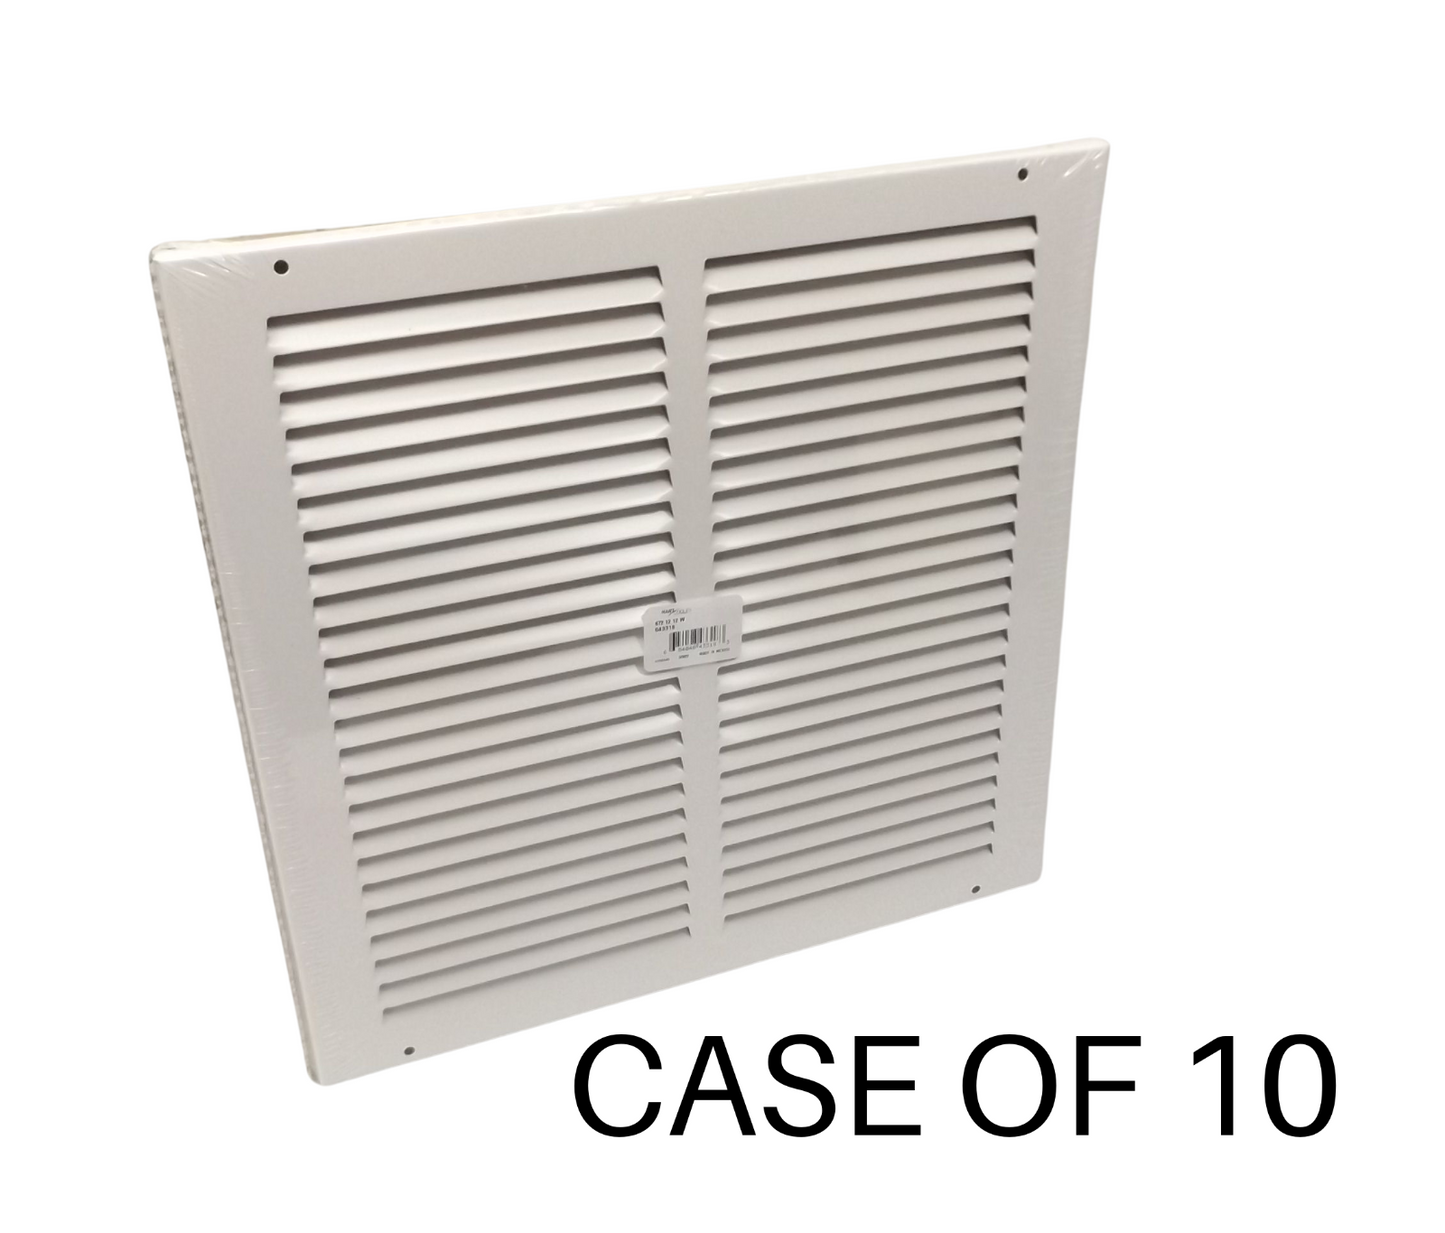 CASE OF 10 HART & COOLEY 043318 12" X 12" 672 STEEL RETURN GRILL WHITE